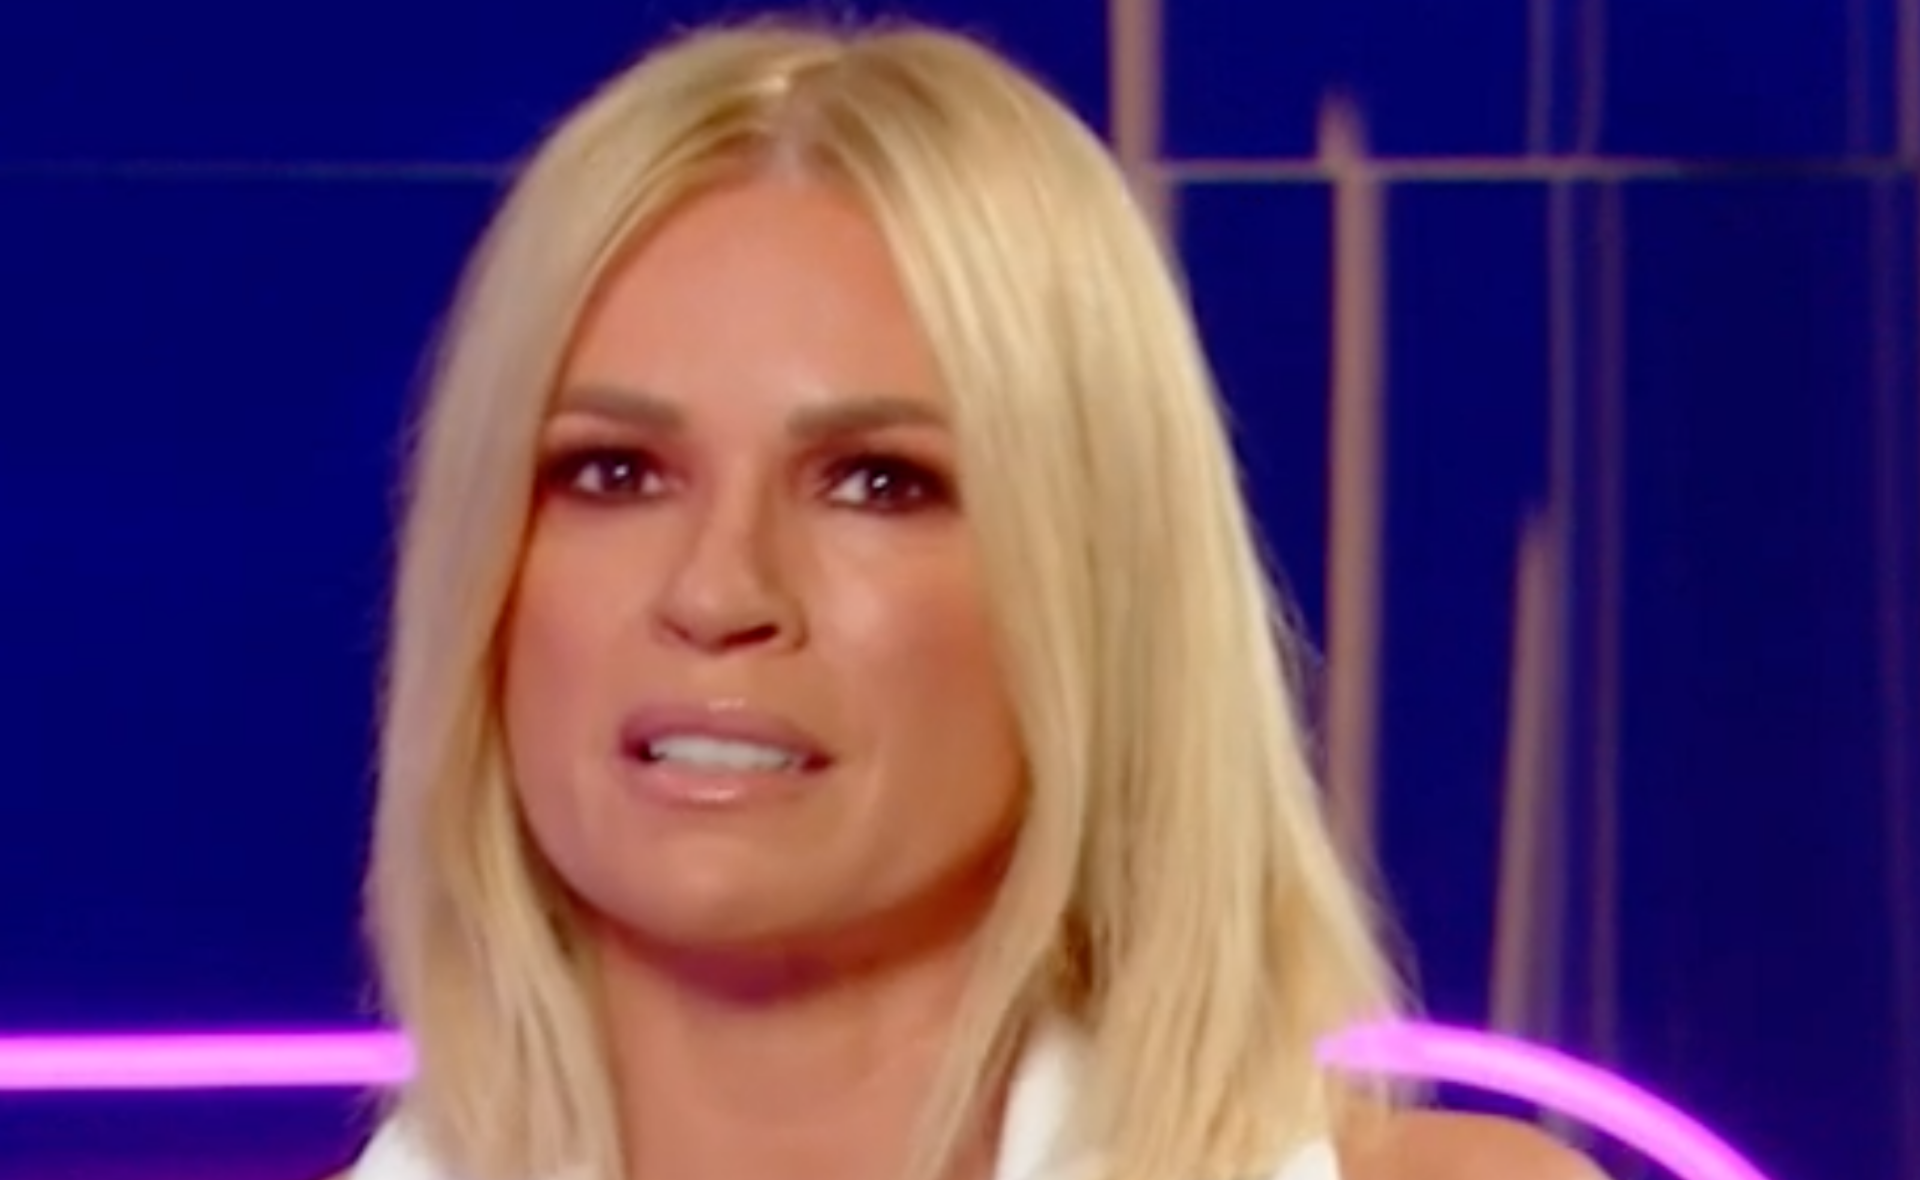 Sonia Kruger is inundated with work, but is it paying off?